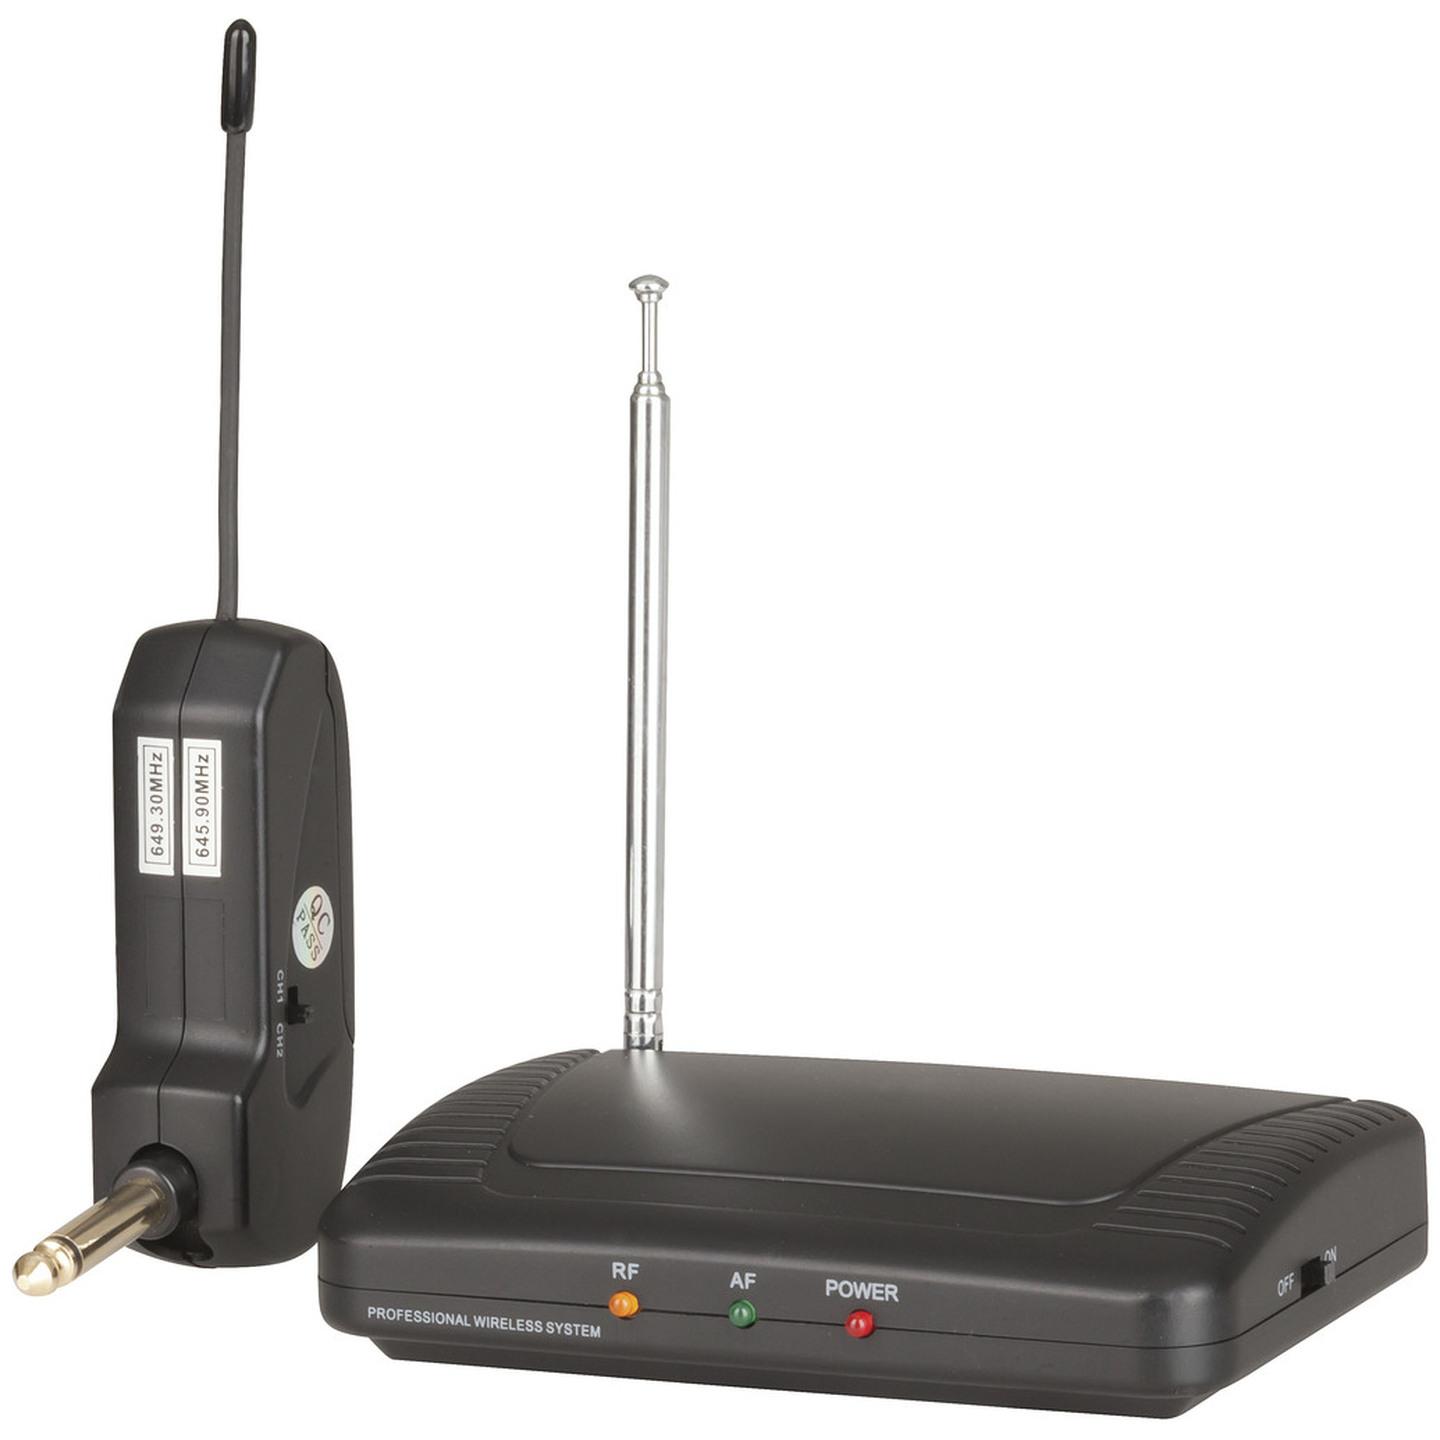 UHF Wireless Guitar Transmitter and Receiver